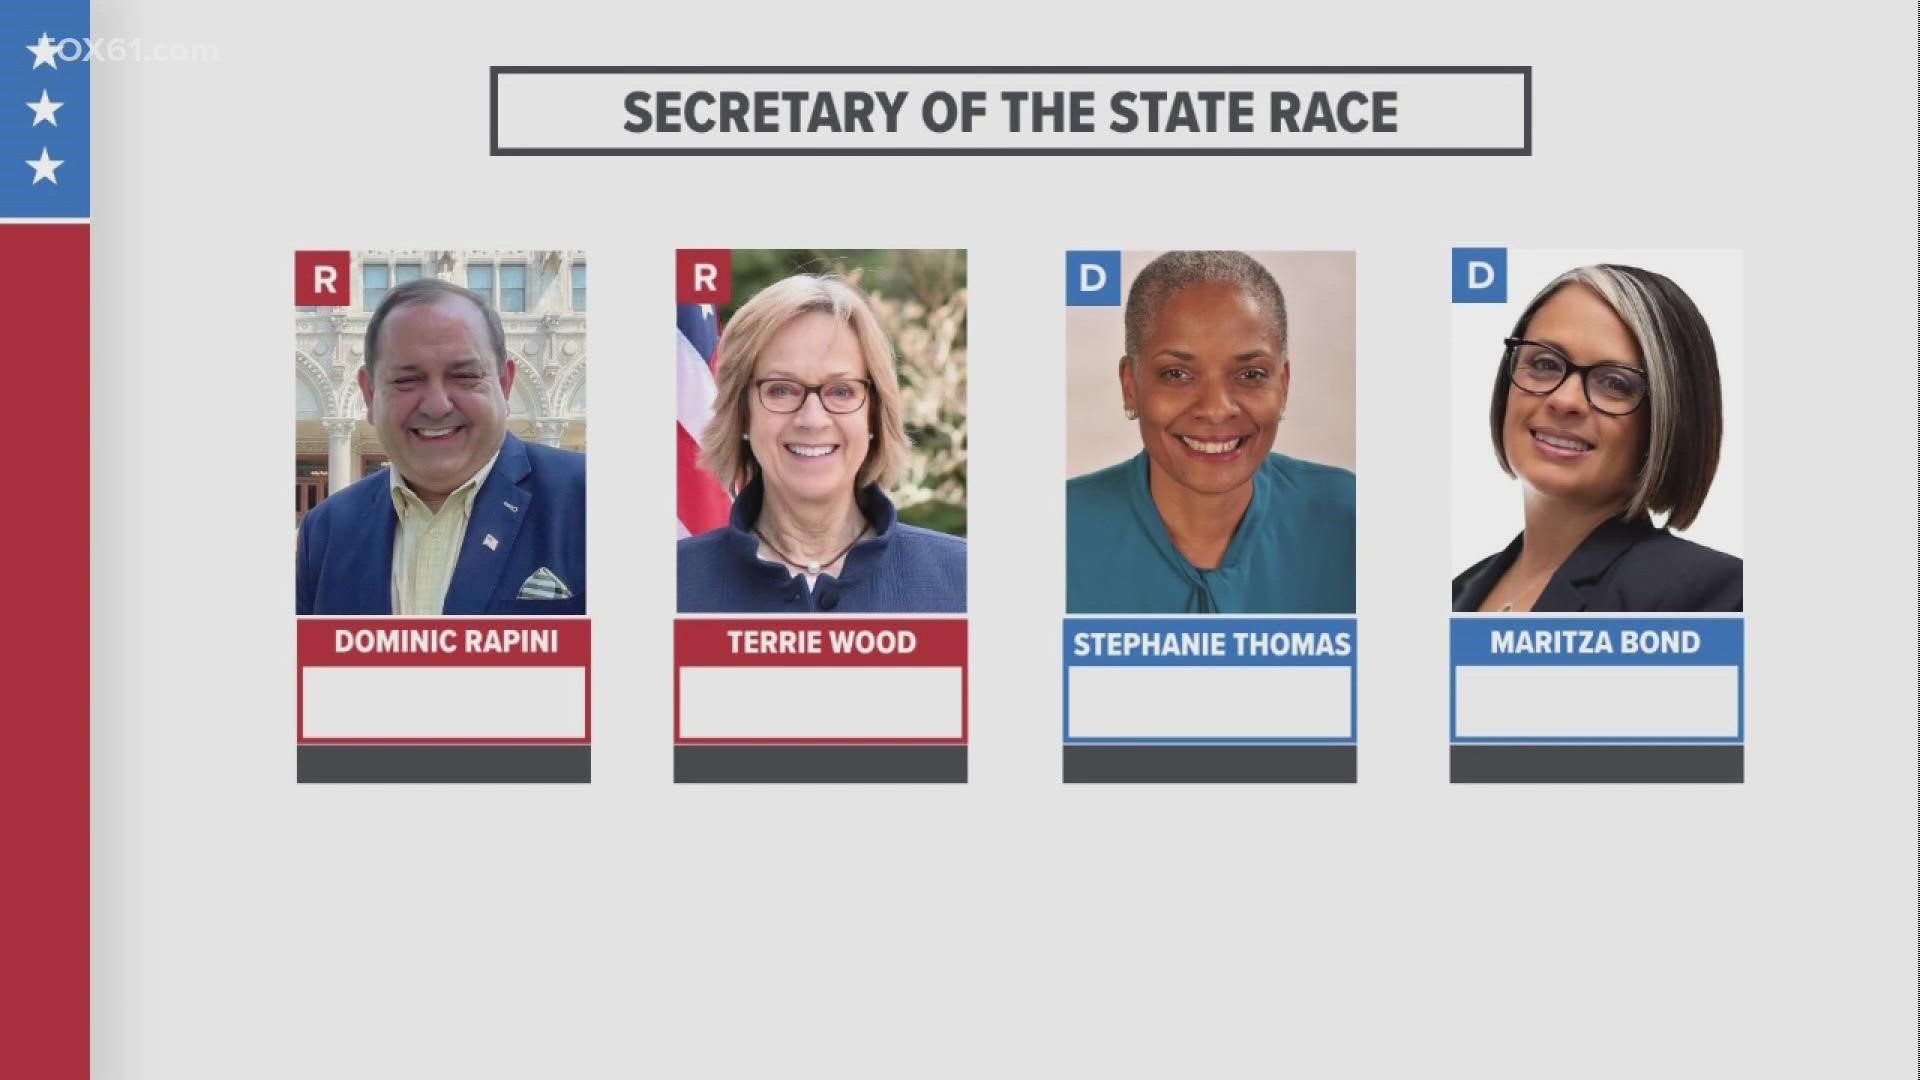 With two candidates on both the Republican and Democratic side, all eyes are on the Secretary of the State race in Connecticut.